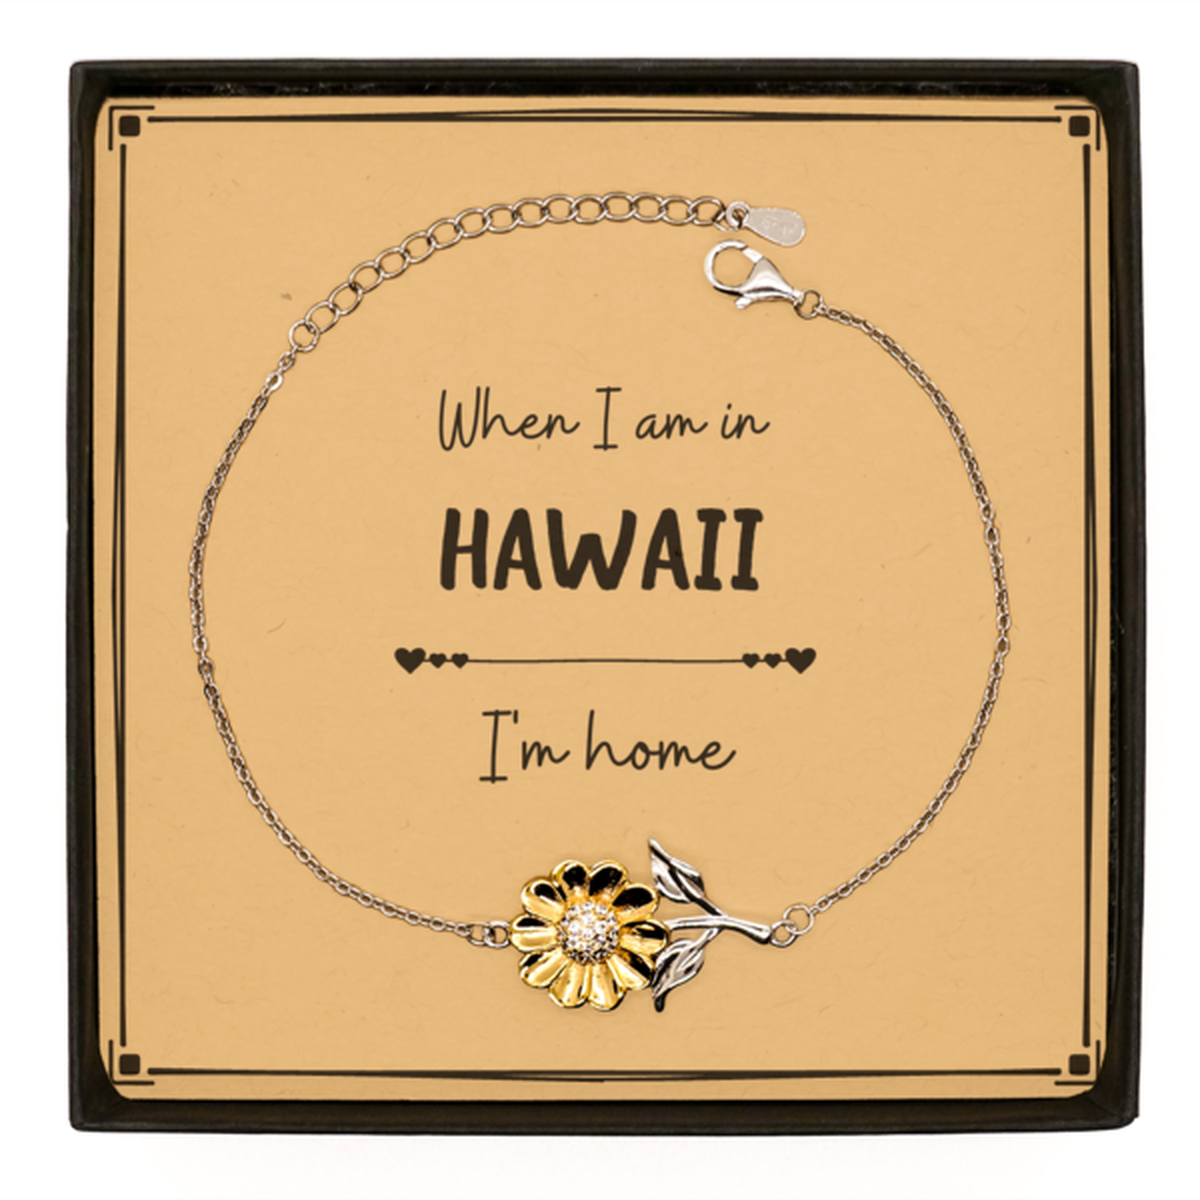 When I am in Hawaii I'm home Sunflower Bracelet, Message Card Gifts For Hawaii, State Hawaii Birthday Gifts for Friends Coworker